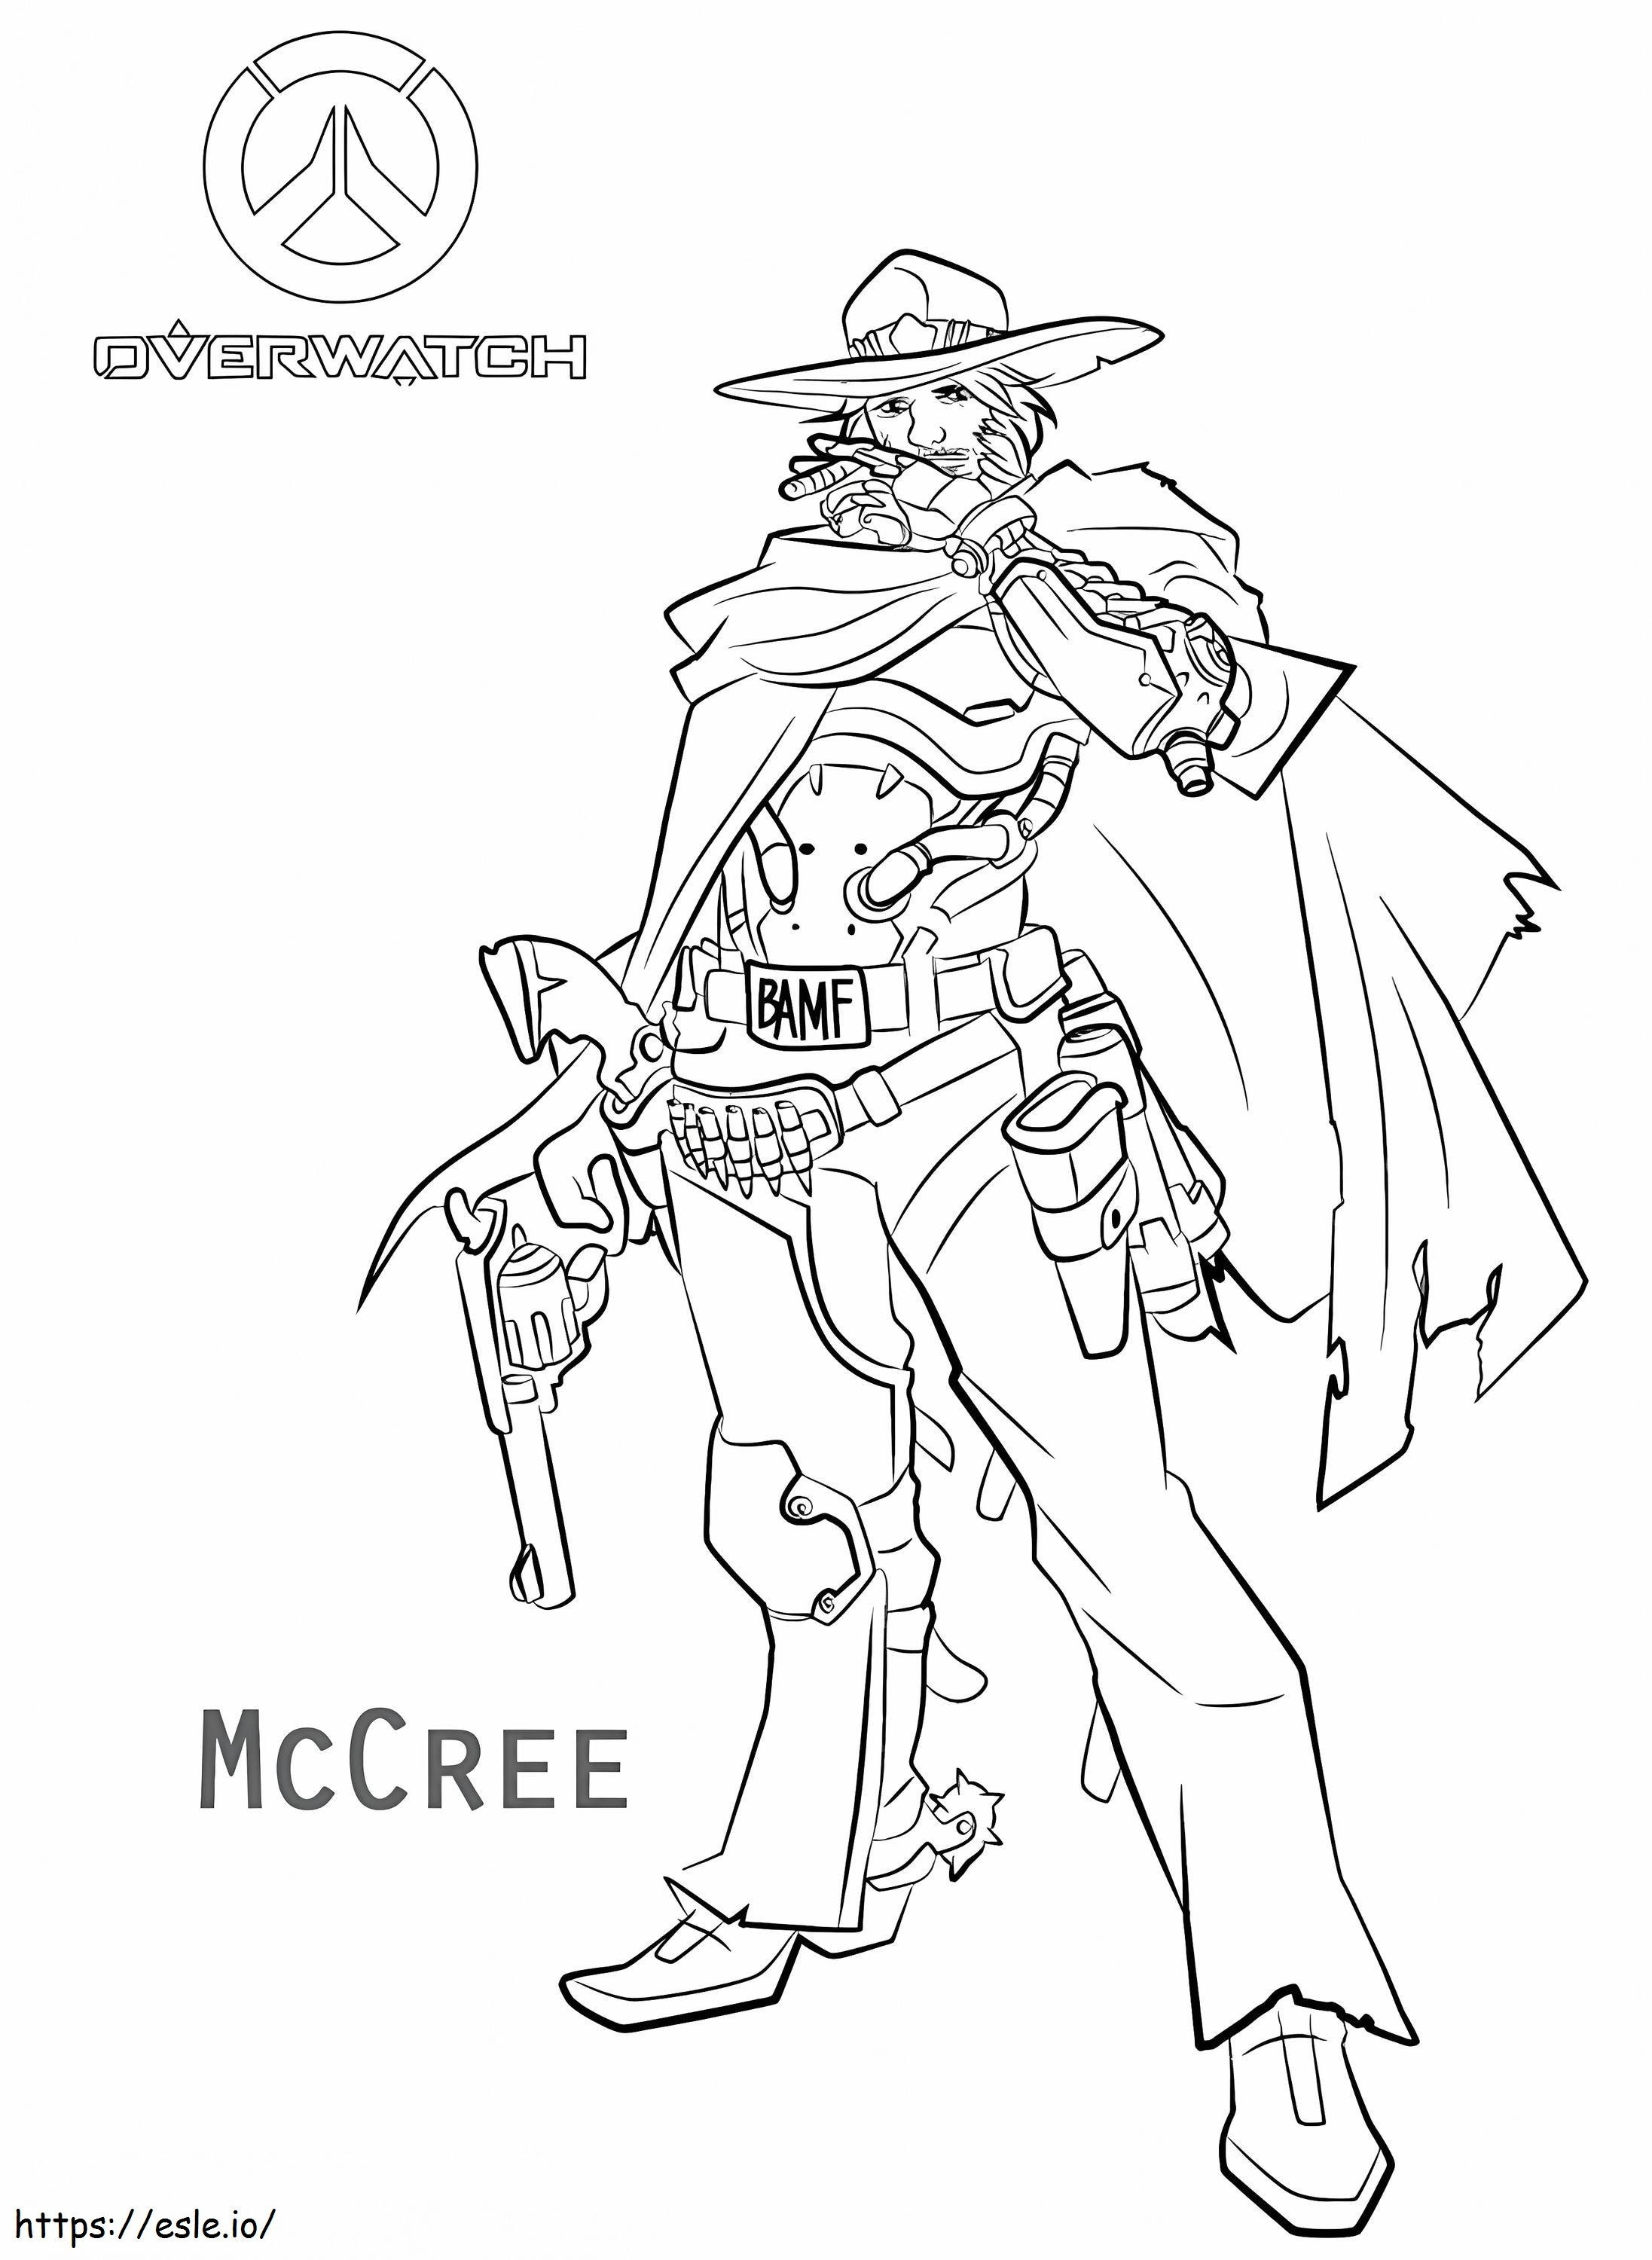 1595553137 1573140333Overwatch Mccree coloring page